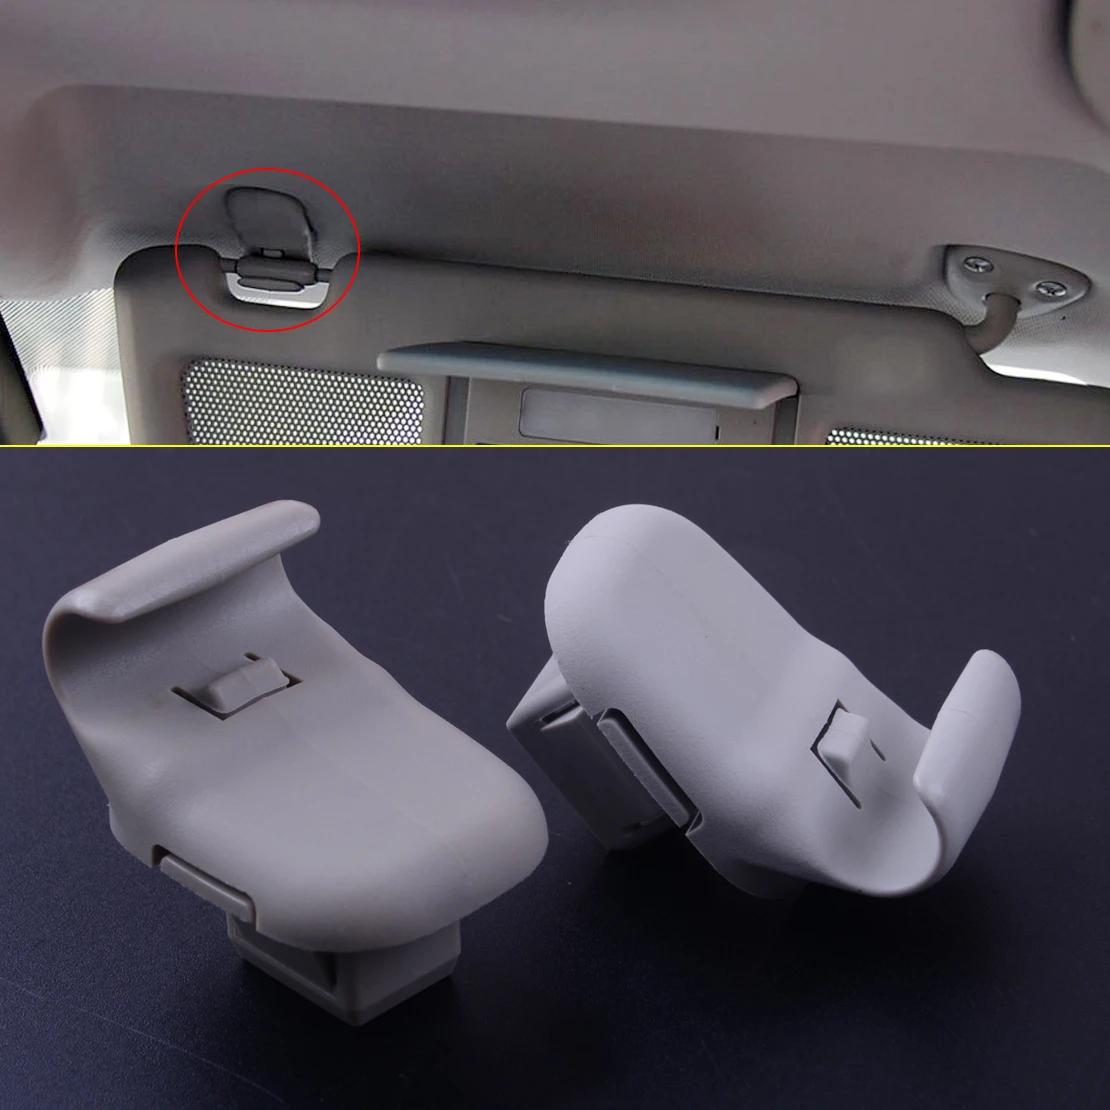 Best Quality Hah Sun Visor Mounting Clip Hook Adapter Fit for Mazda 3 5 6 CX-7 CX-9 RX-8 2007 MPV 2004 2005 2006 